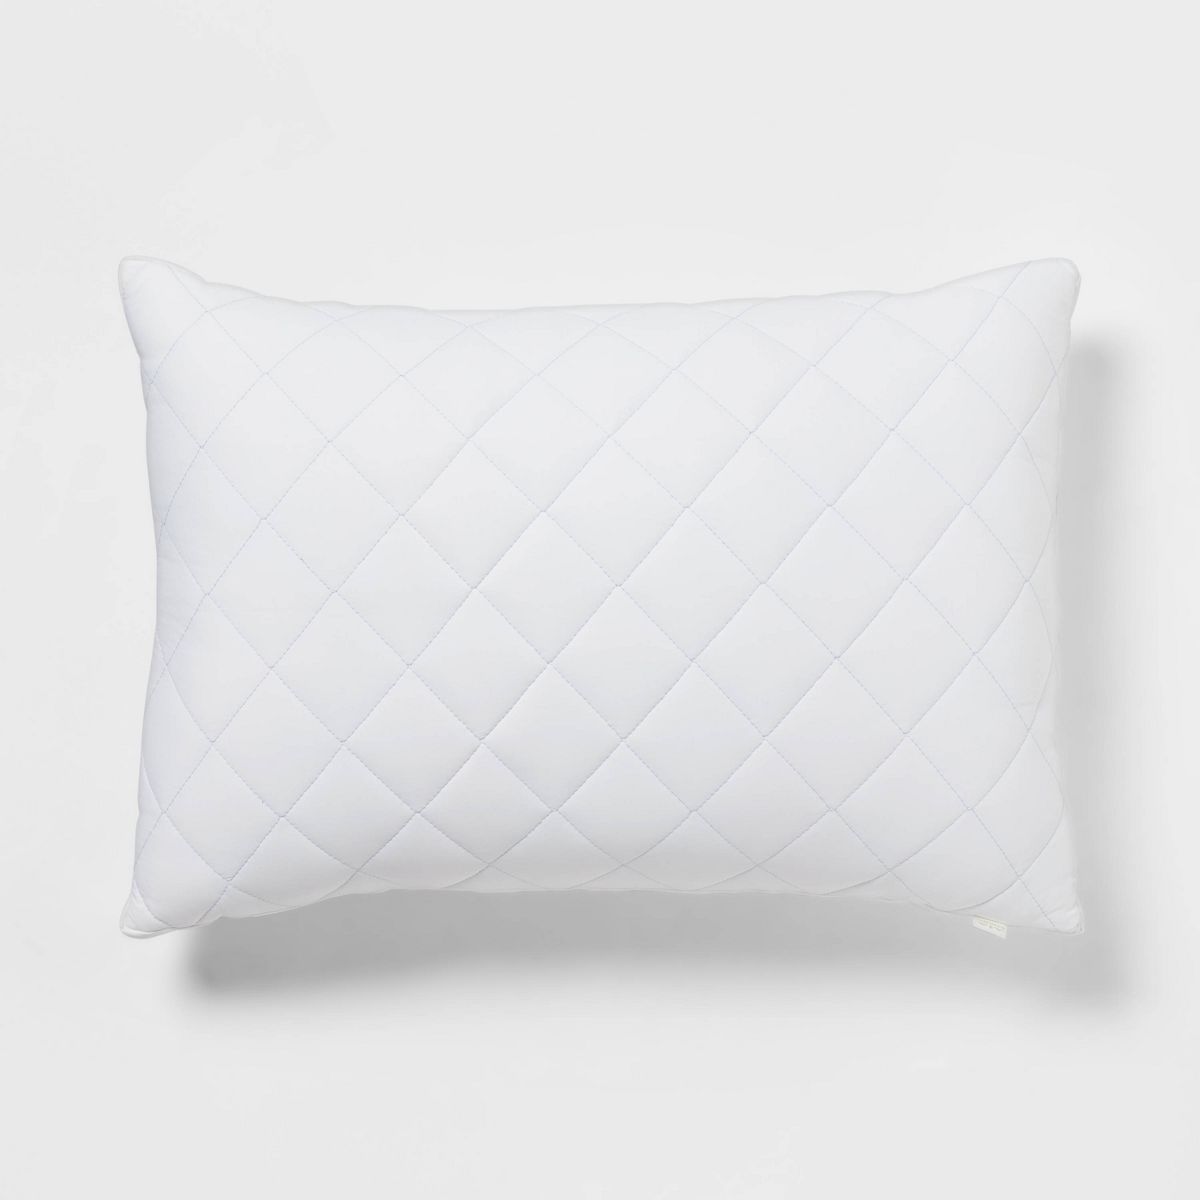 Firm Cool Touch Bed Pillow - Threshold | Target